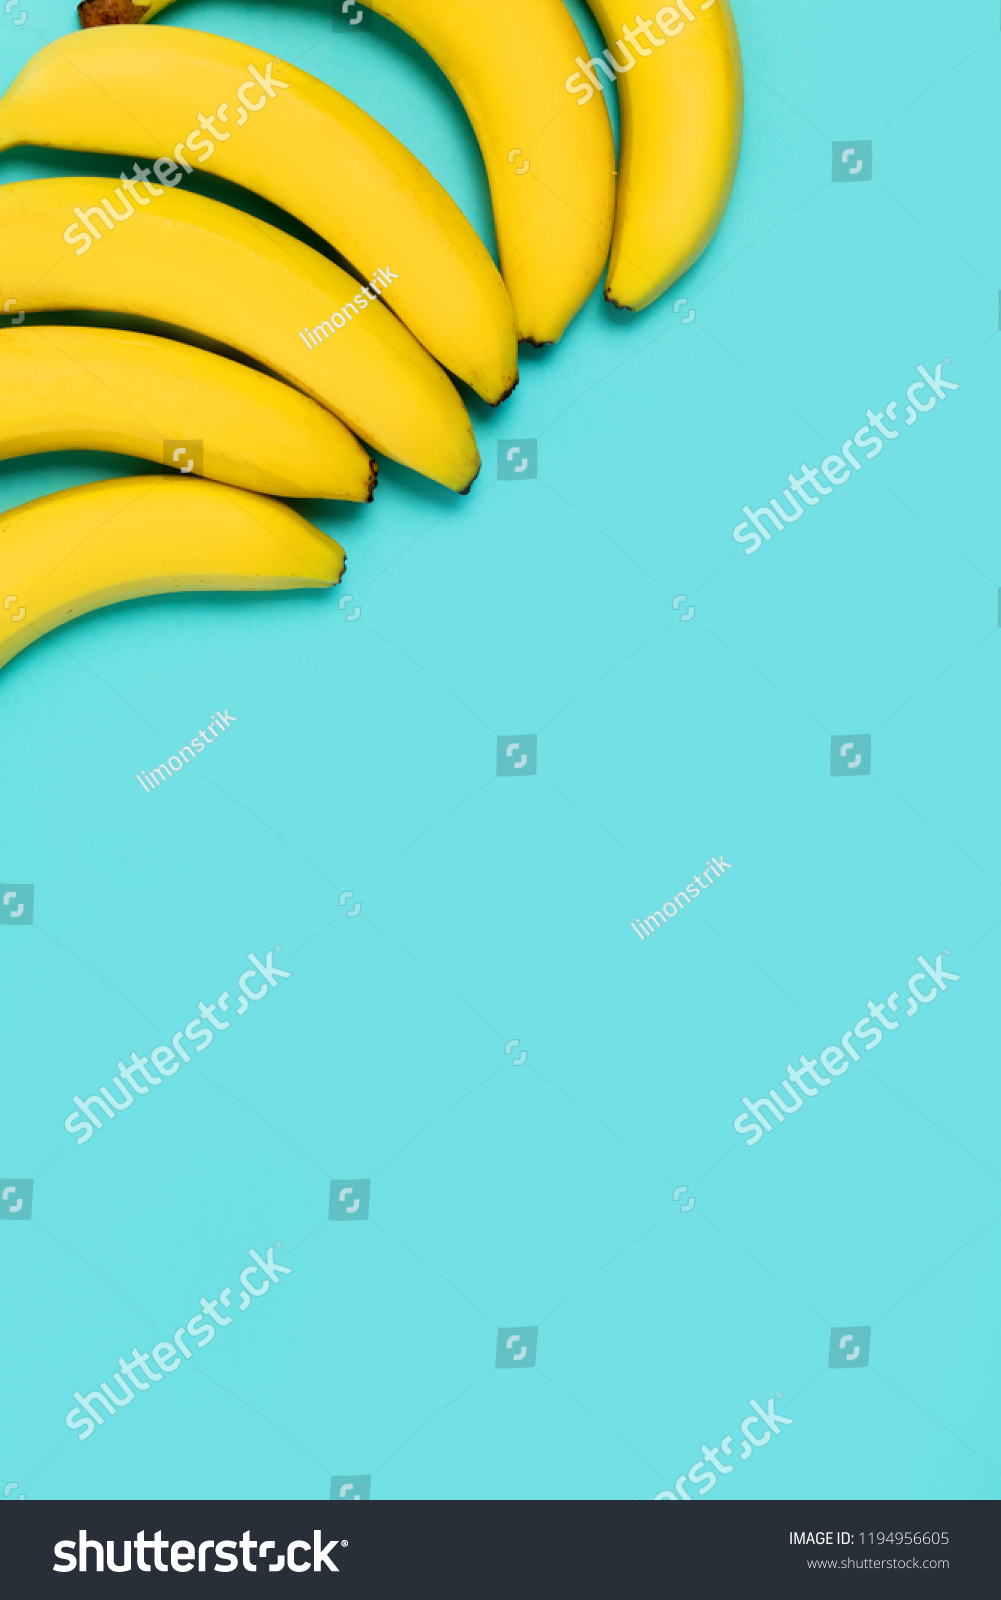 Beautiful yellow bananas on blue colorful background with copy space for text #1194956605